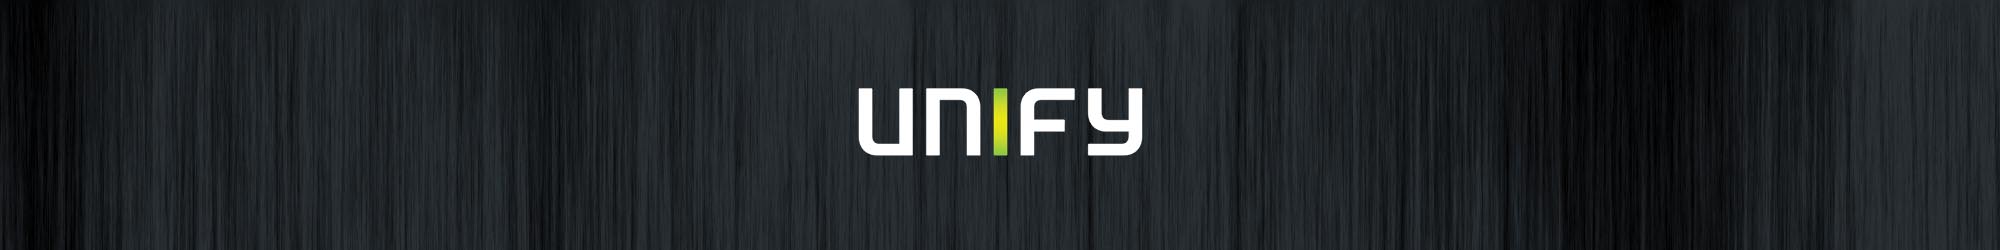 Unify Telephone Systems